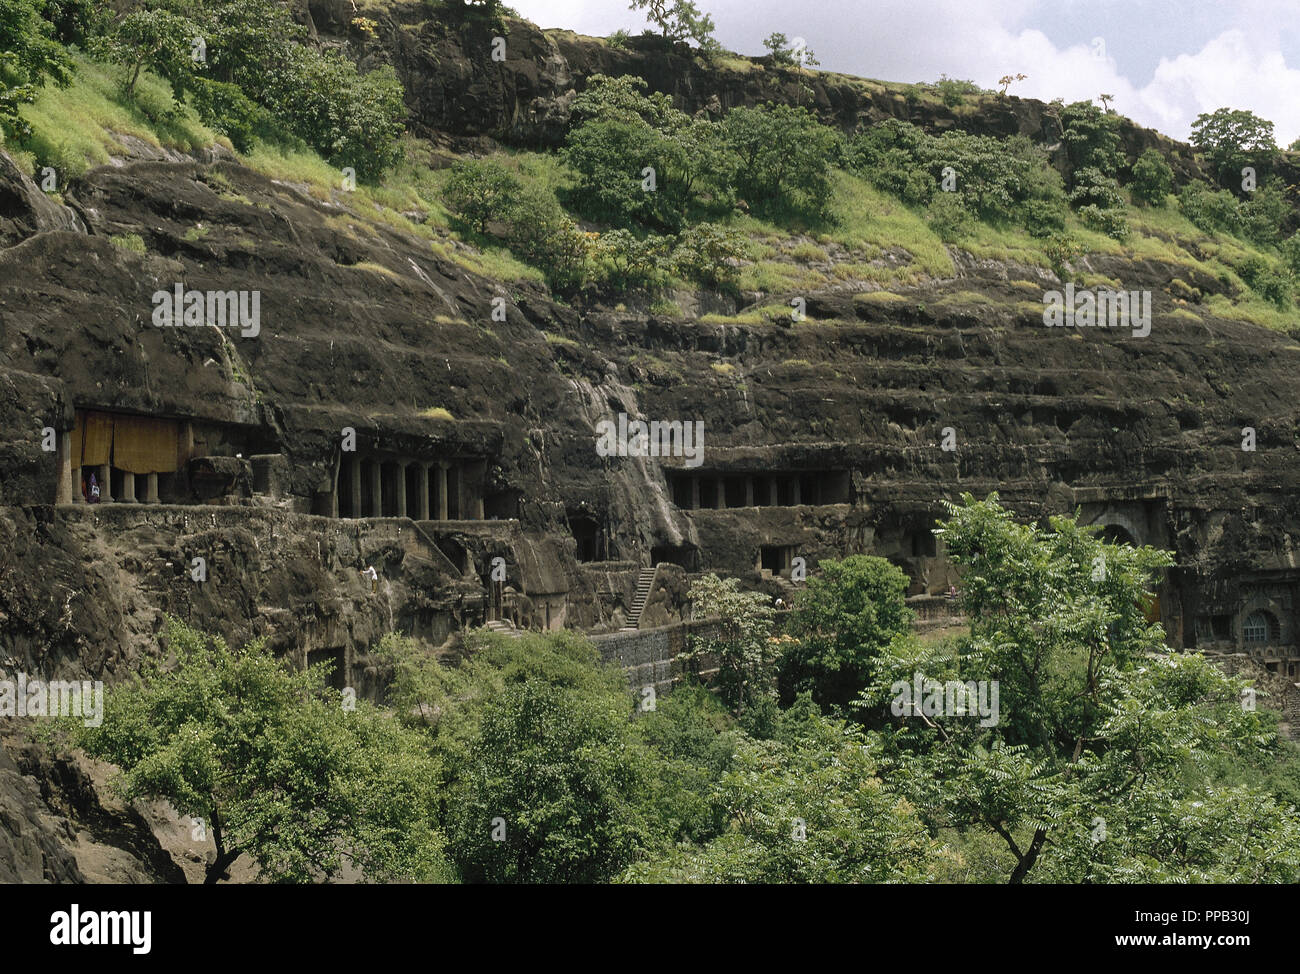 India. The Ajanta Caves. Rock-cut Buddhist cave monuments, dating from 2nd century BCE to aroun 480 CE. Aurangabad district. Maharashtra state. Stock Photo